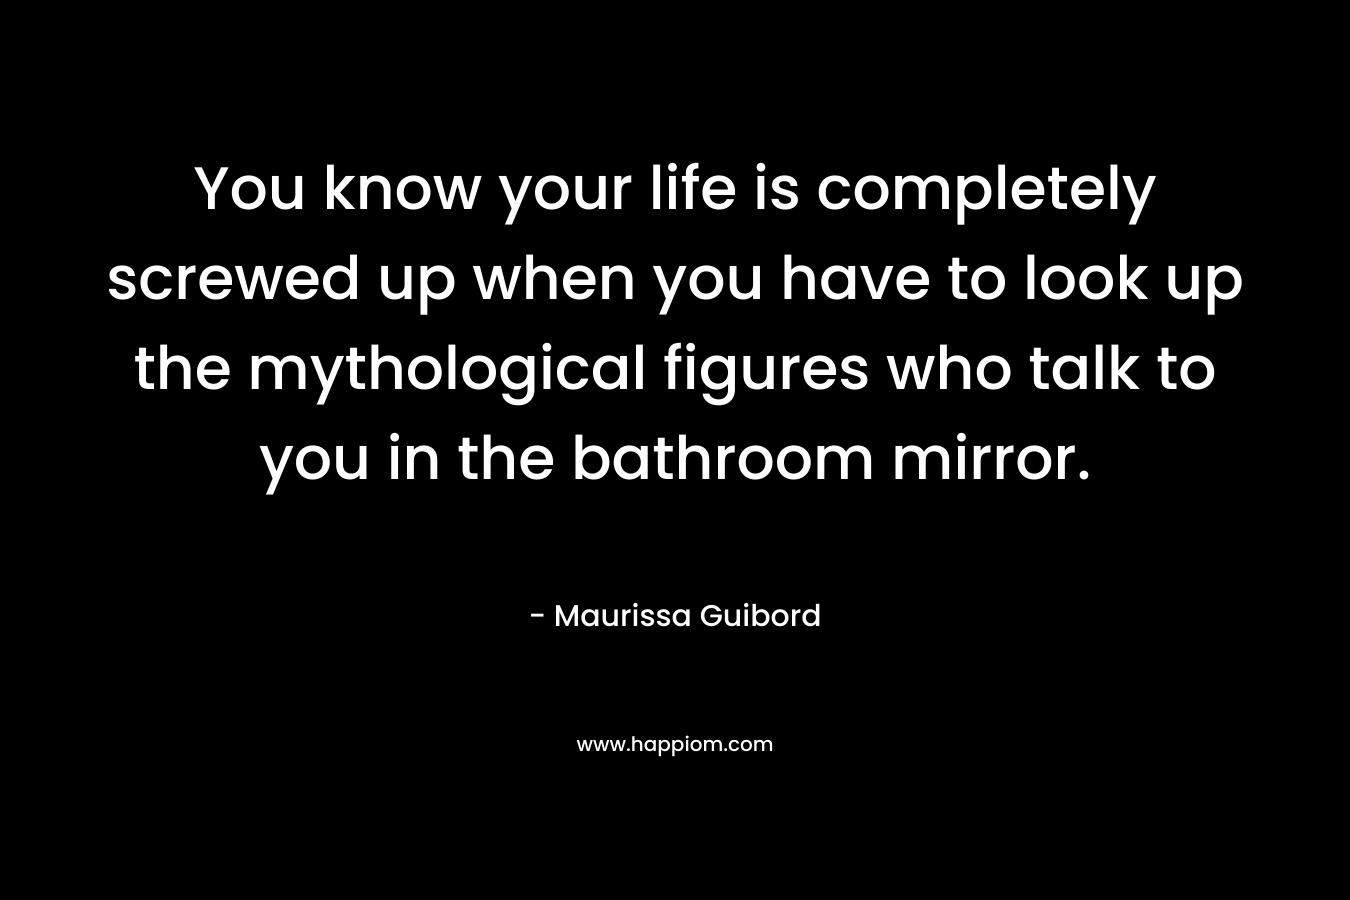 You know your life is completely screwed up when you have to look up the mythological figures who talk to you in the bathroom mirror.